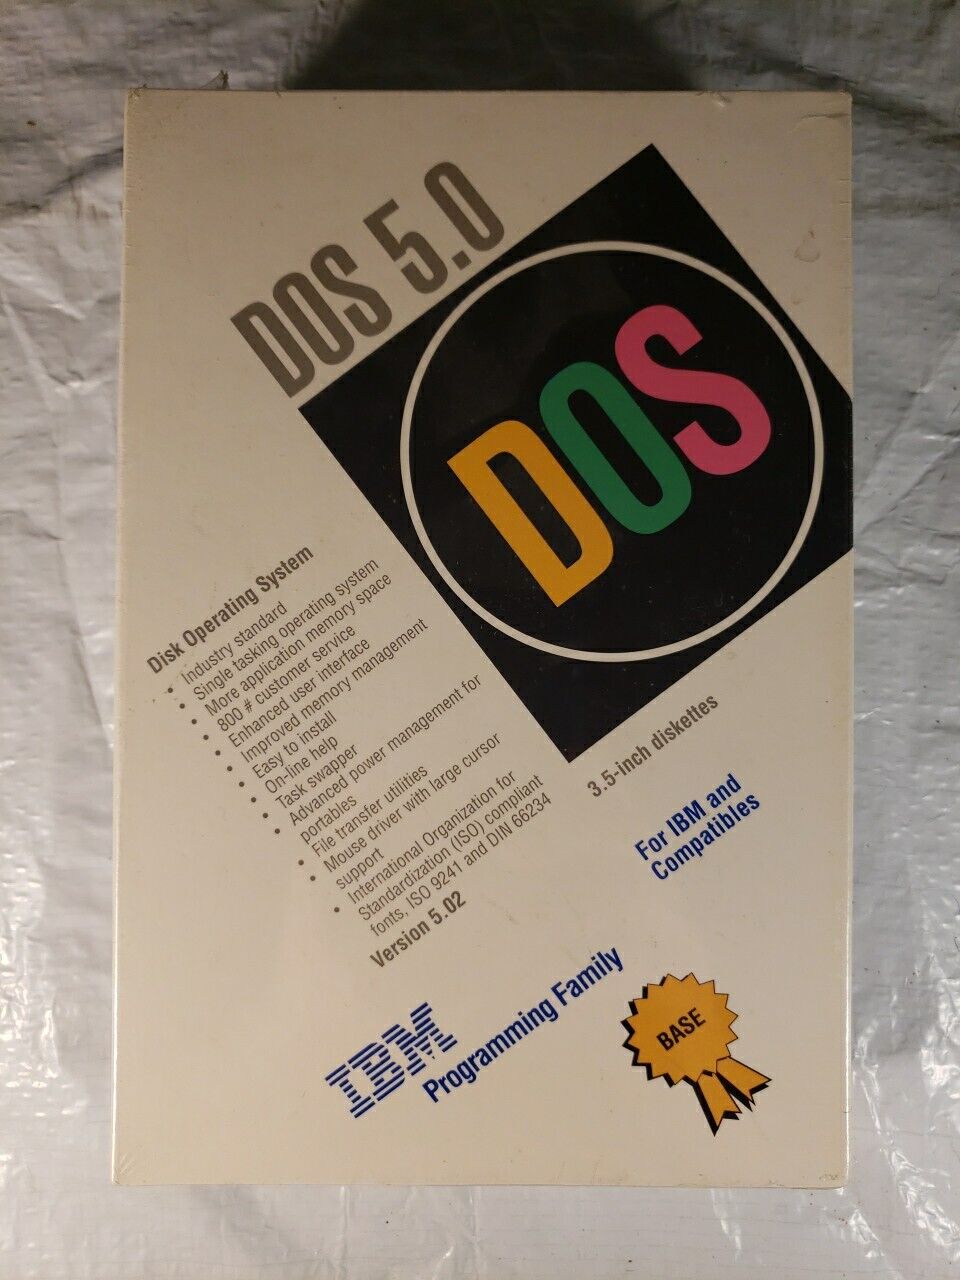 Microsoft MS DOS 5.0 IBM 3.5 inch Diskettes IBM and Compatibles 1992 New In Box